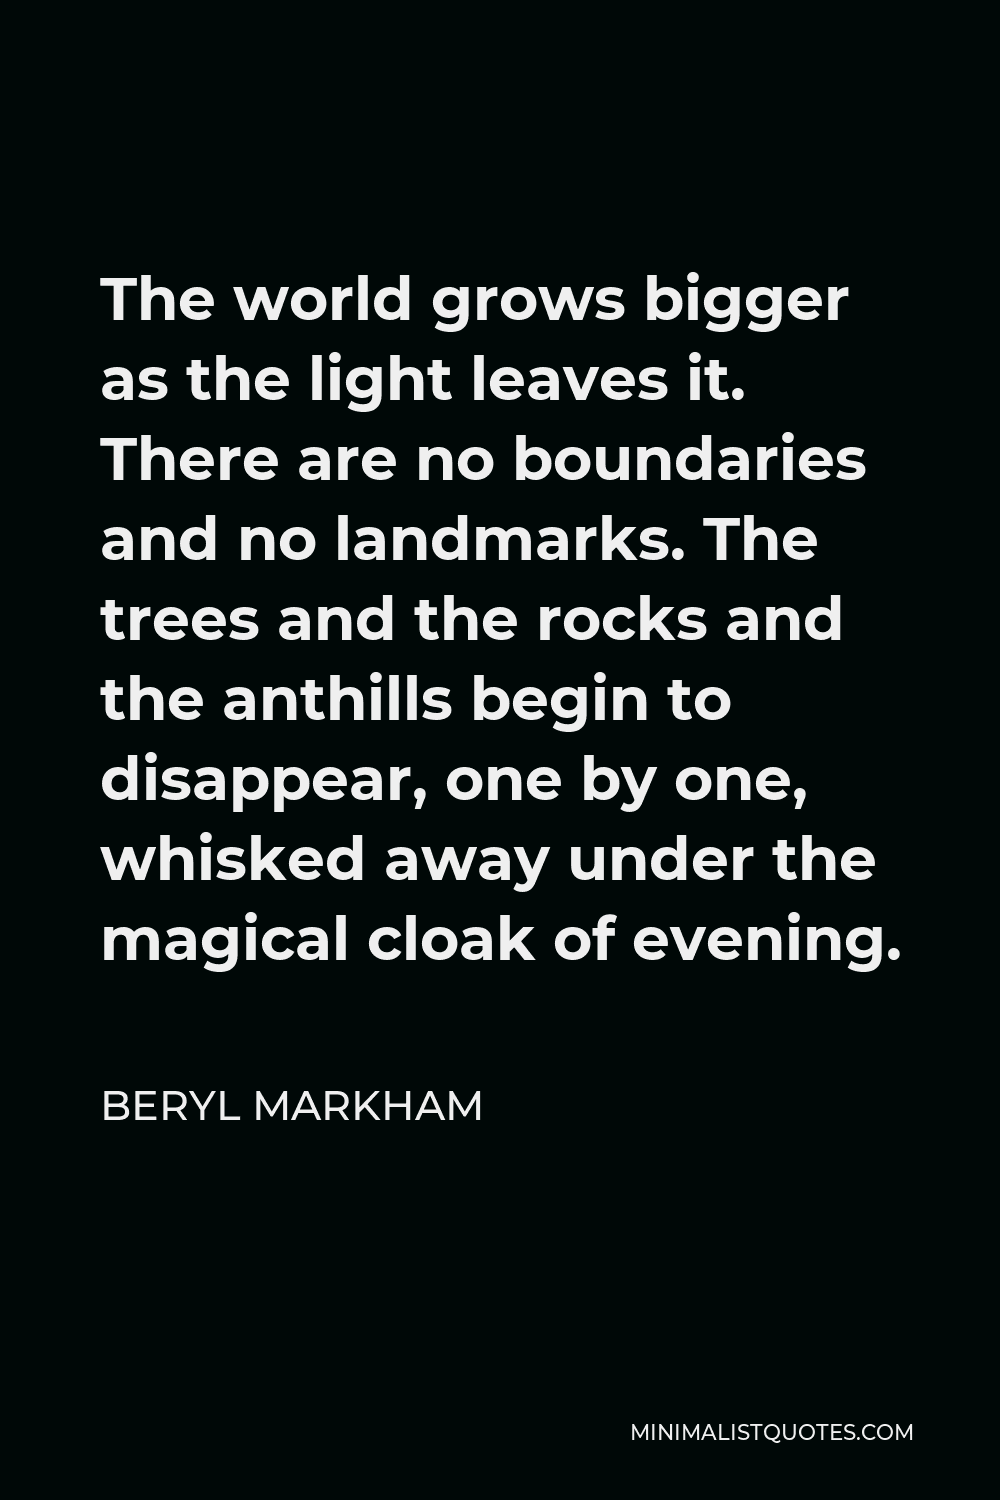 Beryl Markham Quote - The world grows bigger as the light leaves it. There are no boundaries and no landmarks. The trees and the rocks and the anthills begin to disappear, one by one, whisked away under the magical cloak of evening.